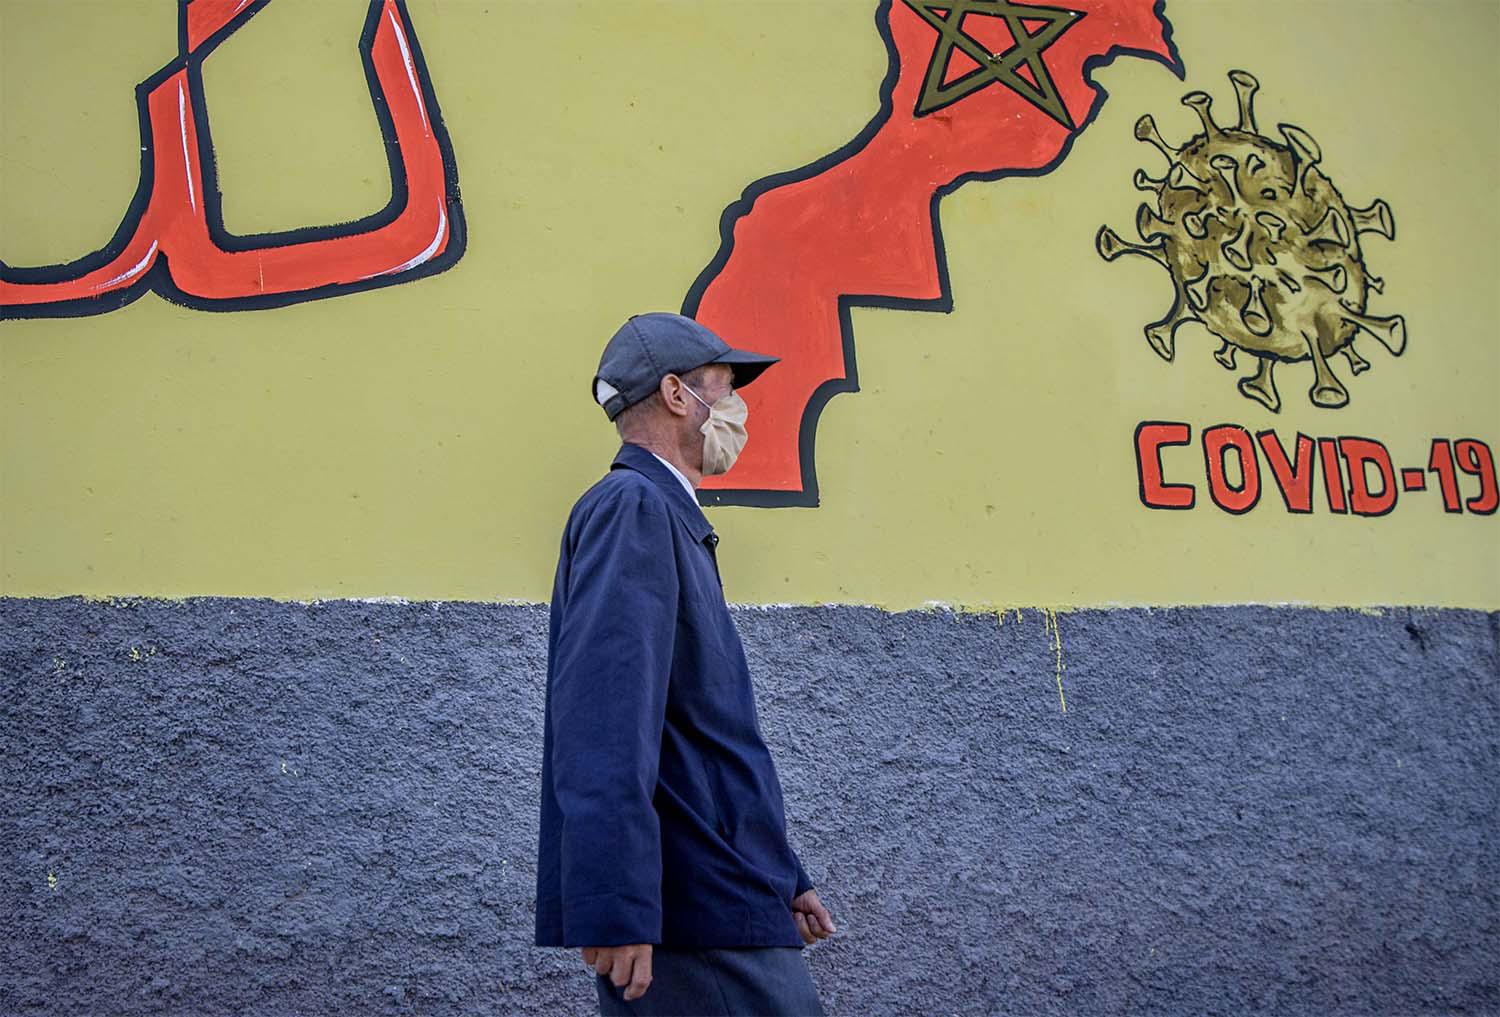 A Moroccan man wearing a protective mask walks past a mural painting of COVID-19